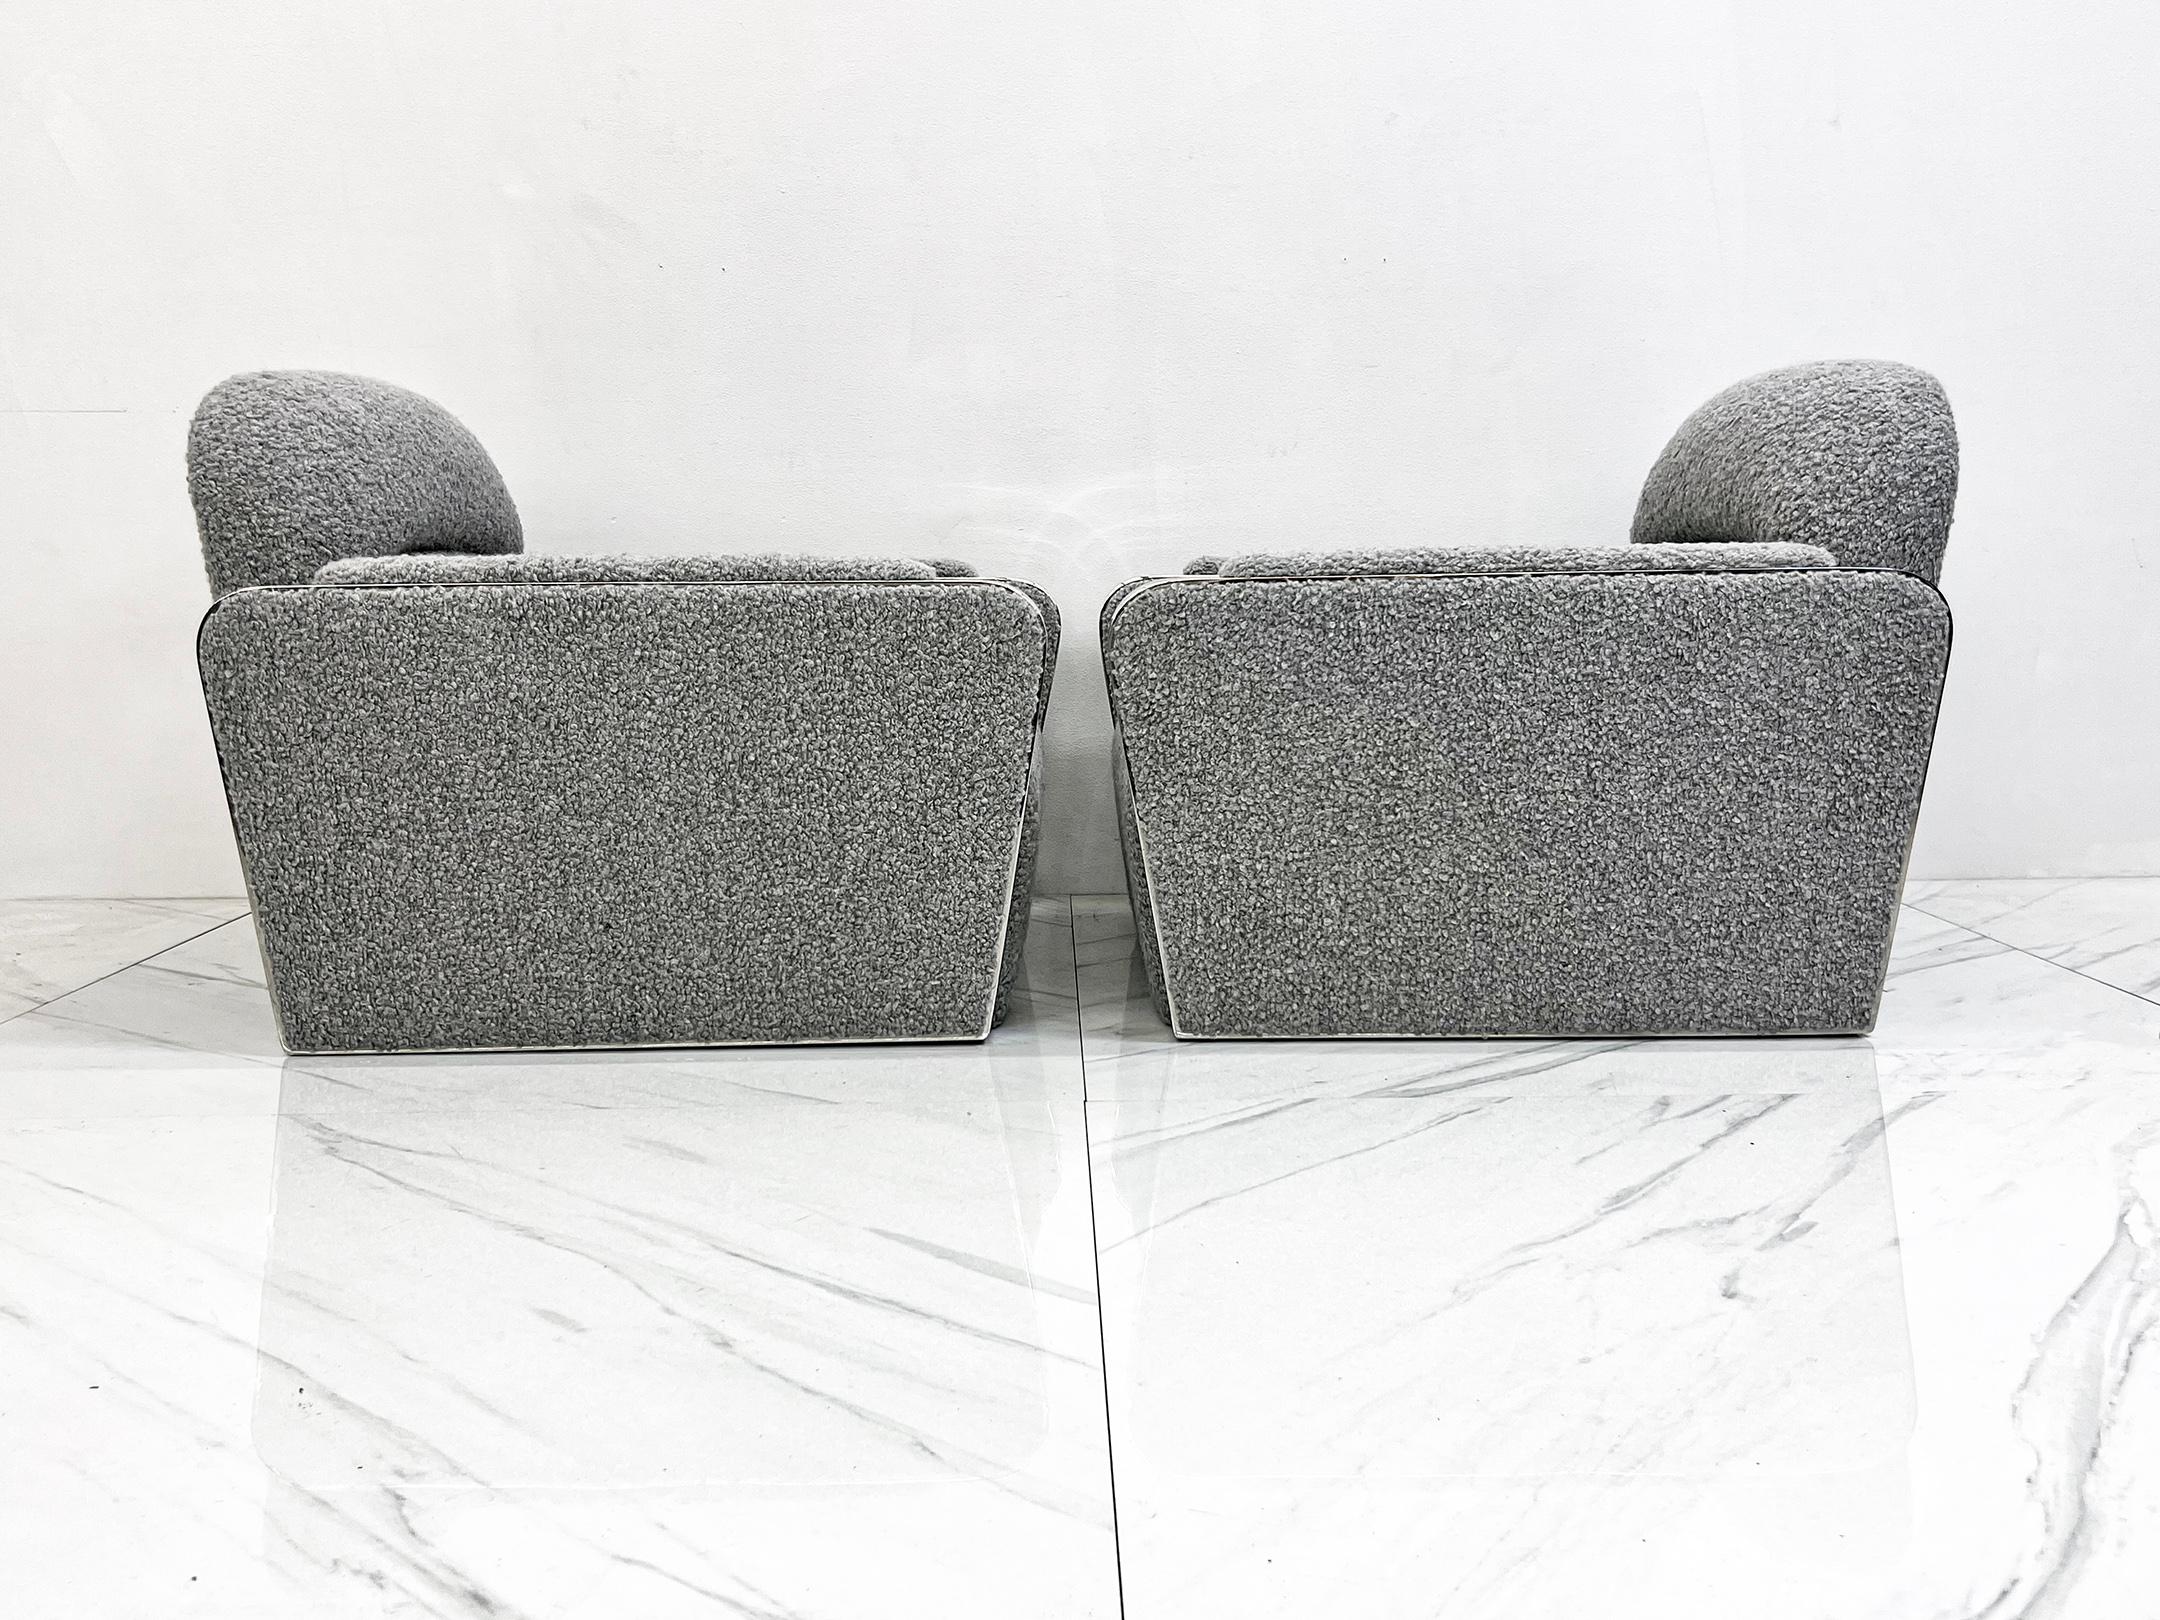 Bouclé Lounge Chairs by Stanley Jay Friedman for Brueton, Gray Boucle, 1980's, a Pair For Sale